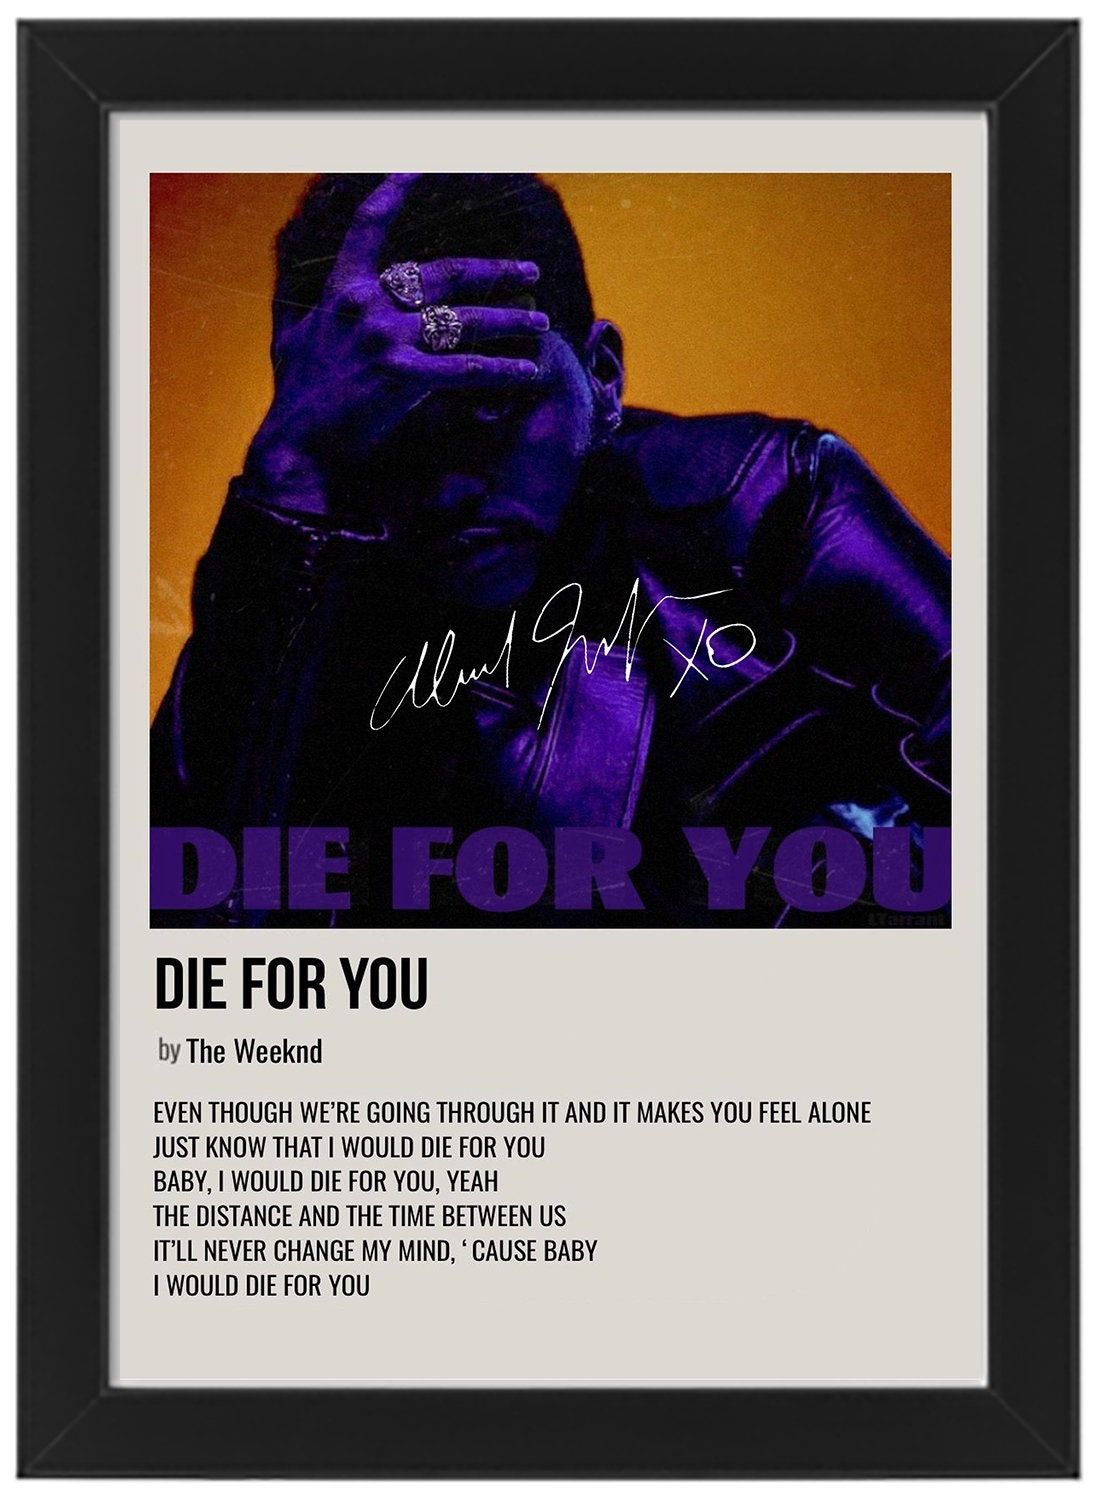 The Weeknd Die For You Signed Music Collage Print - Etsy Israel